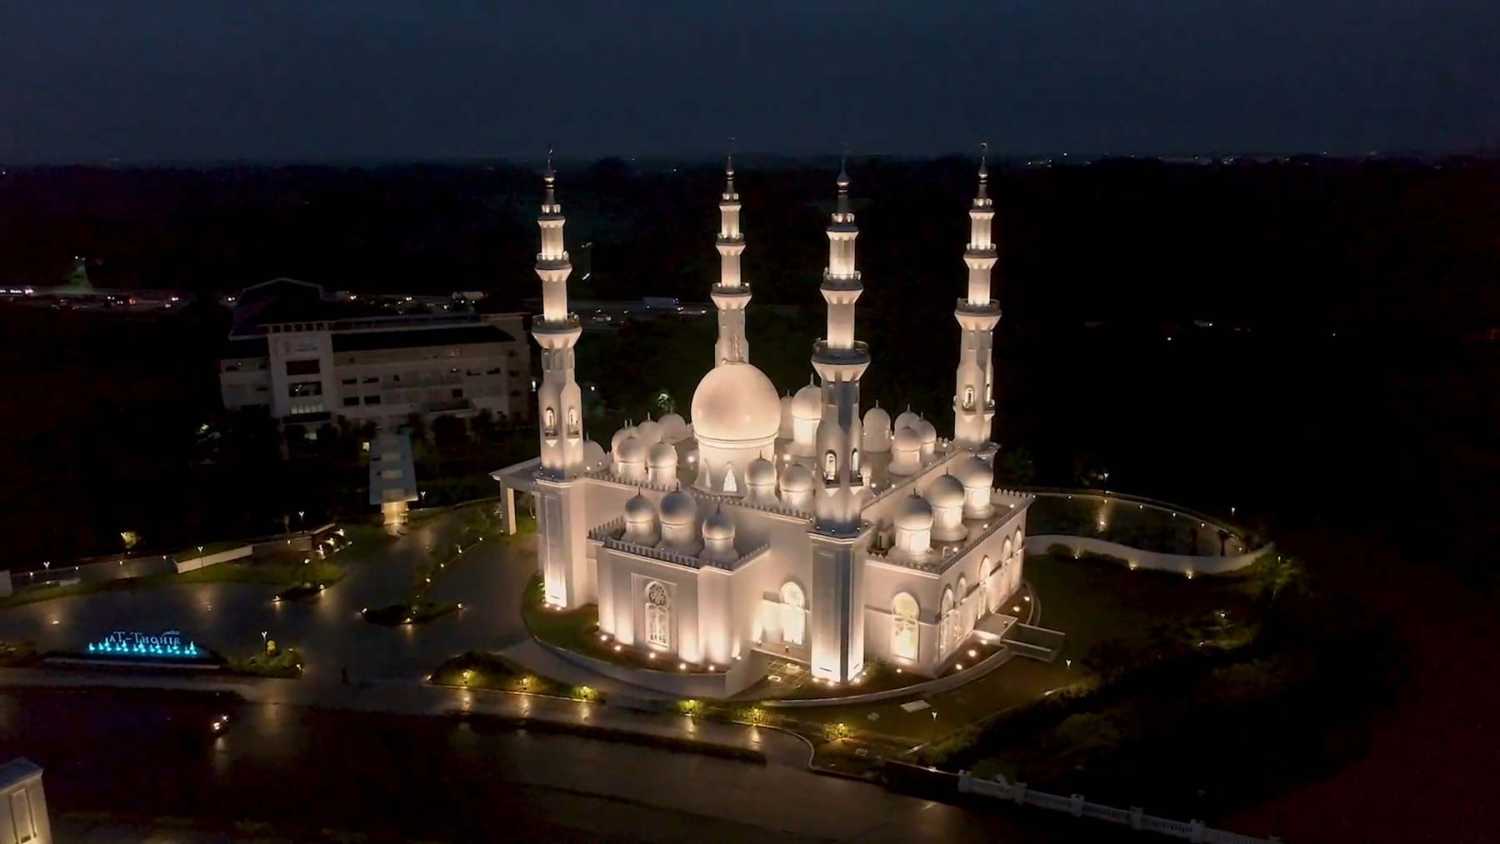 The pearlescent house of worship features 29 domes meant to signify family